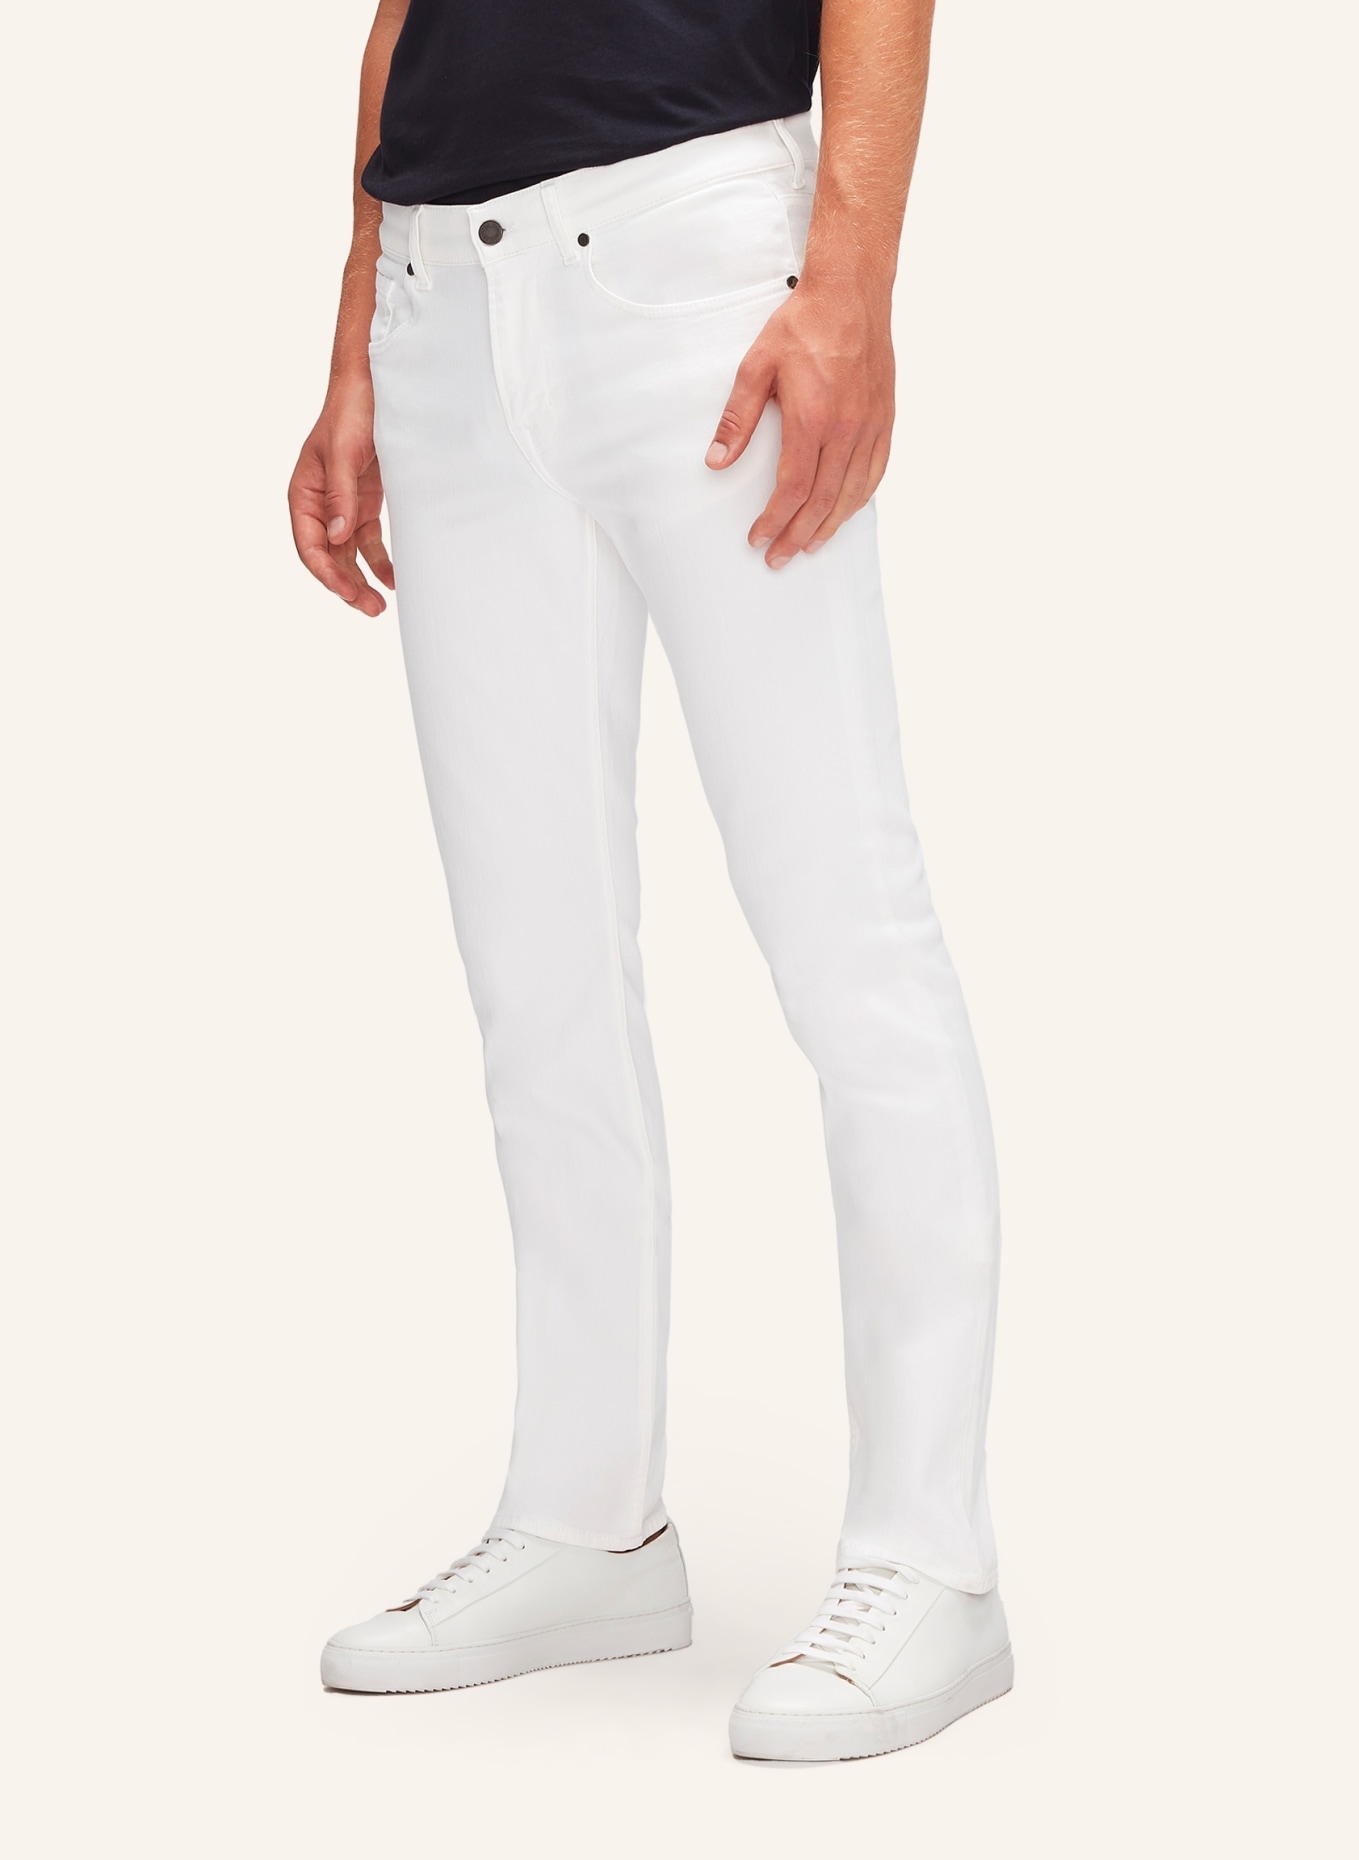 7 for all mankind Jeans SLIMMY Slim fit, Farbe: WEISS (Bild 2)